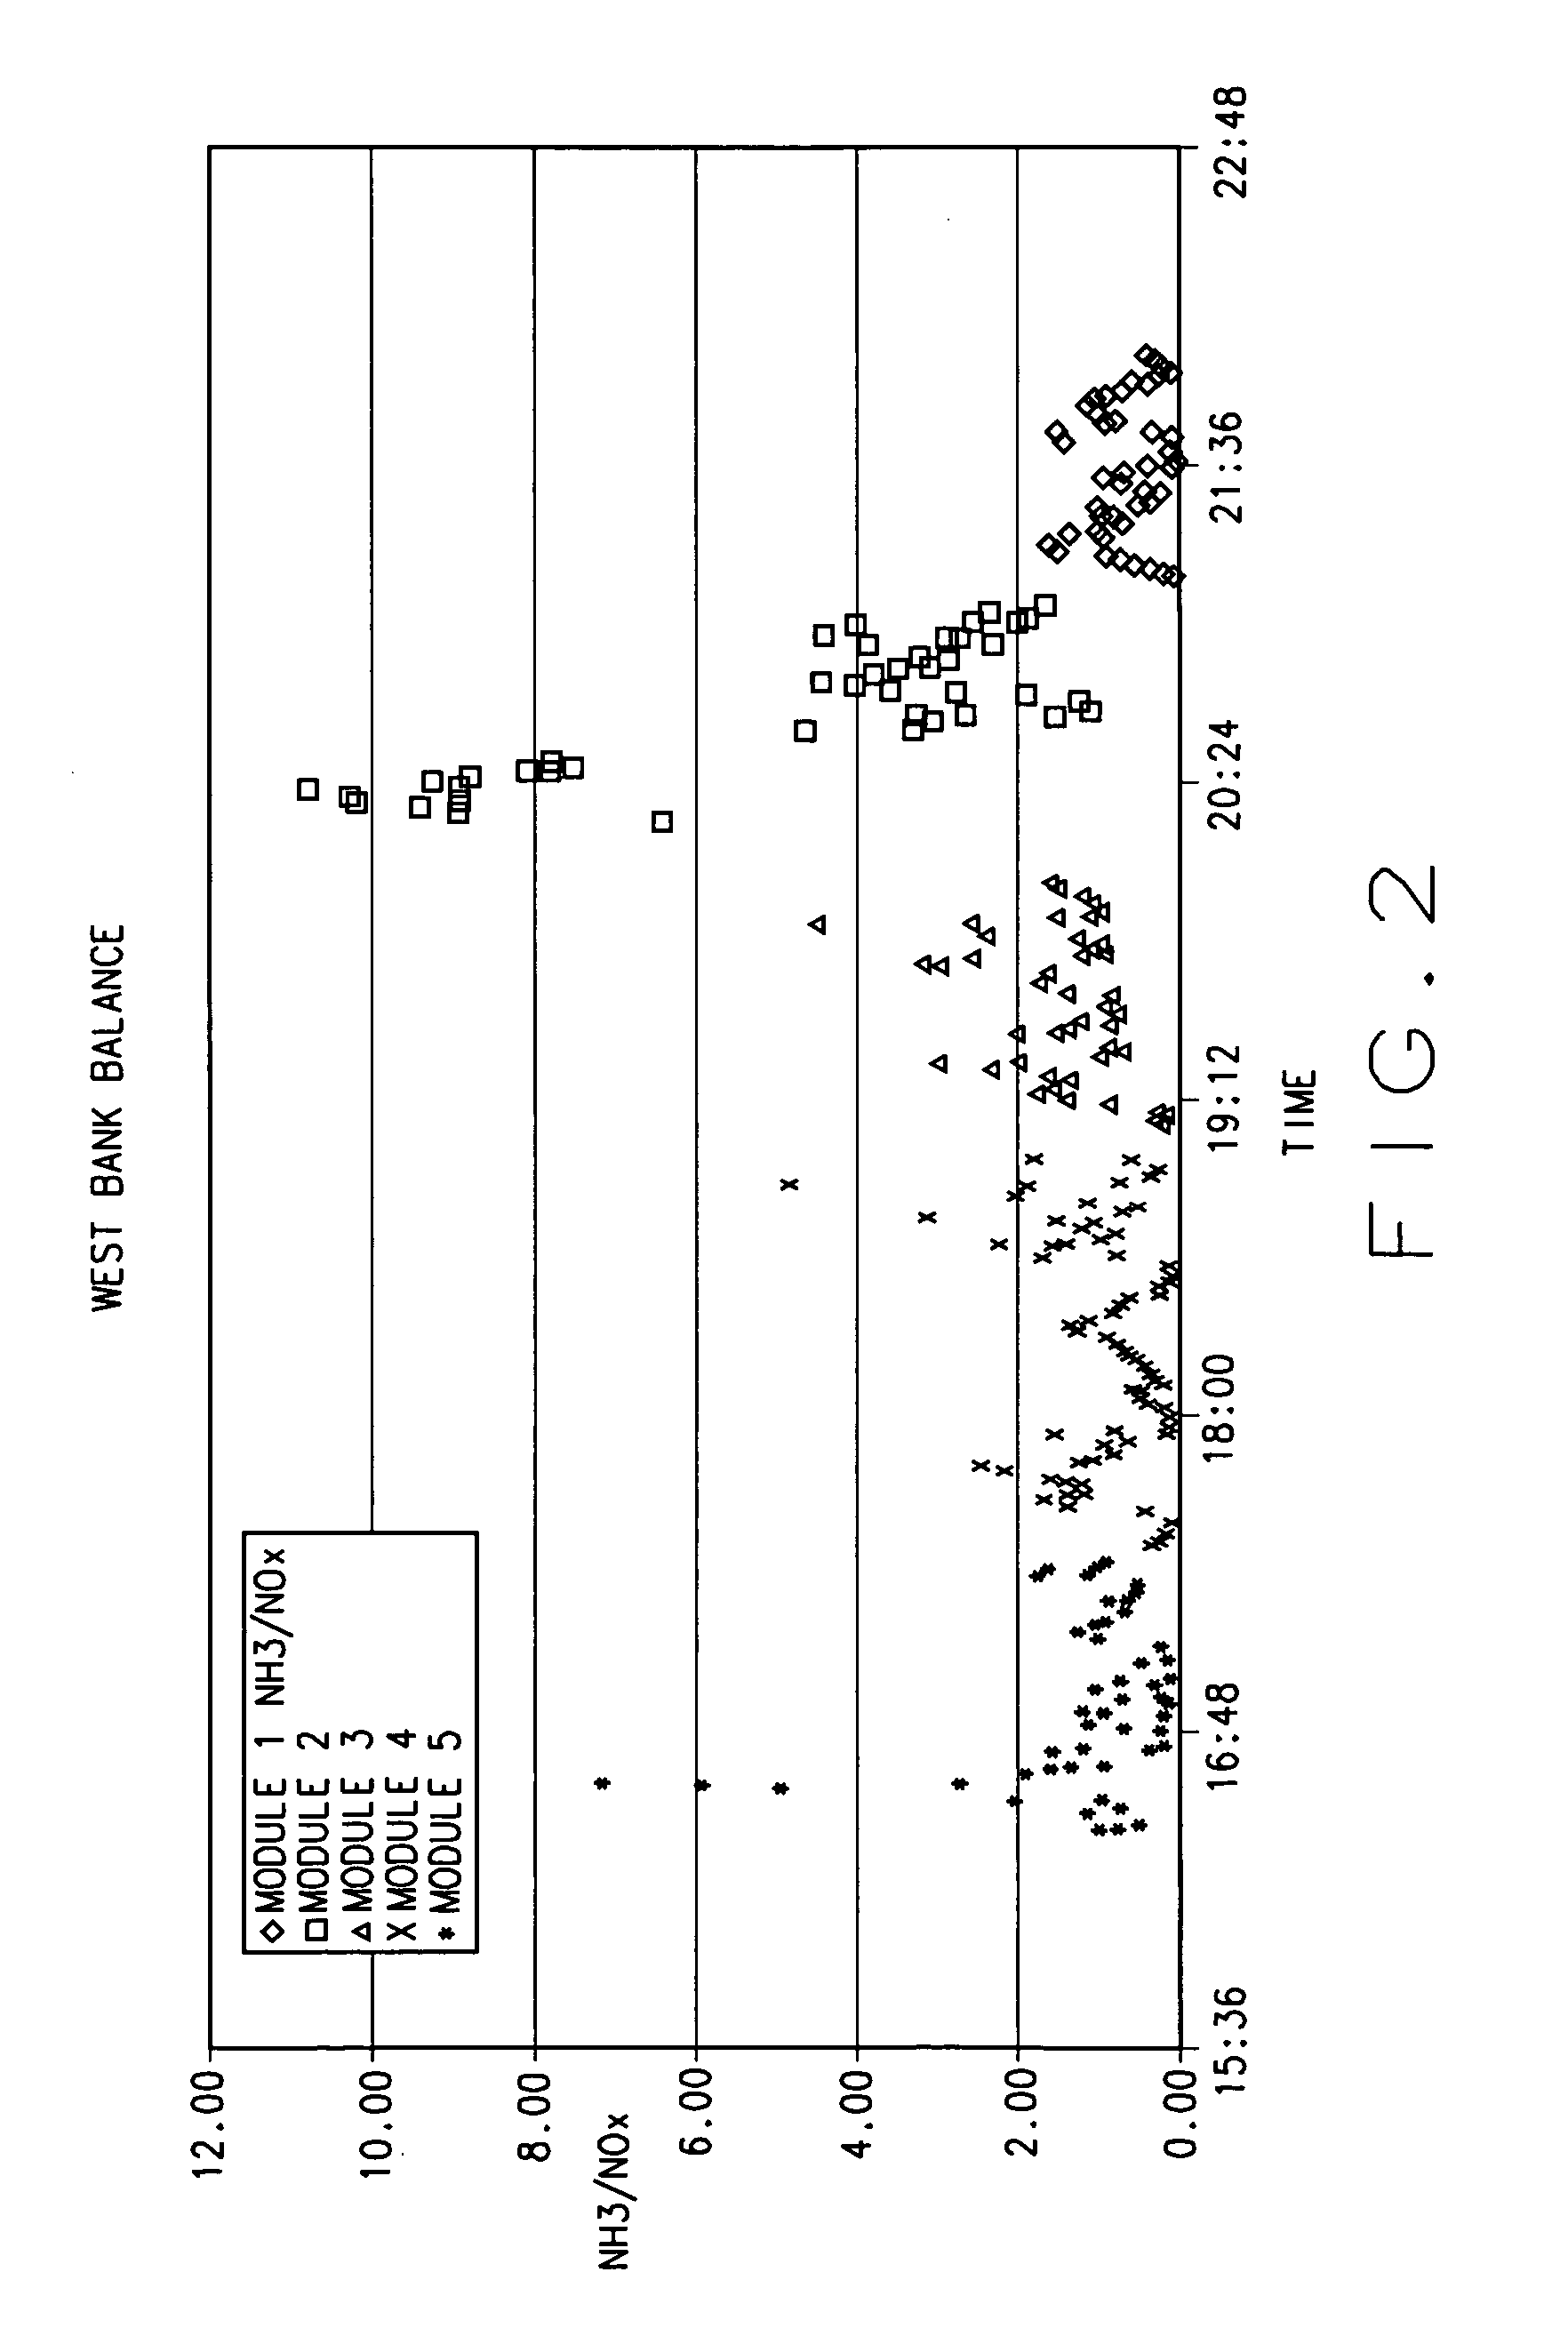 Method and apparatus for measuring and controlling selective catalytic reduction (SCR) emission control systems